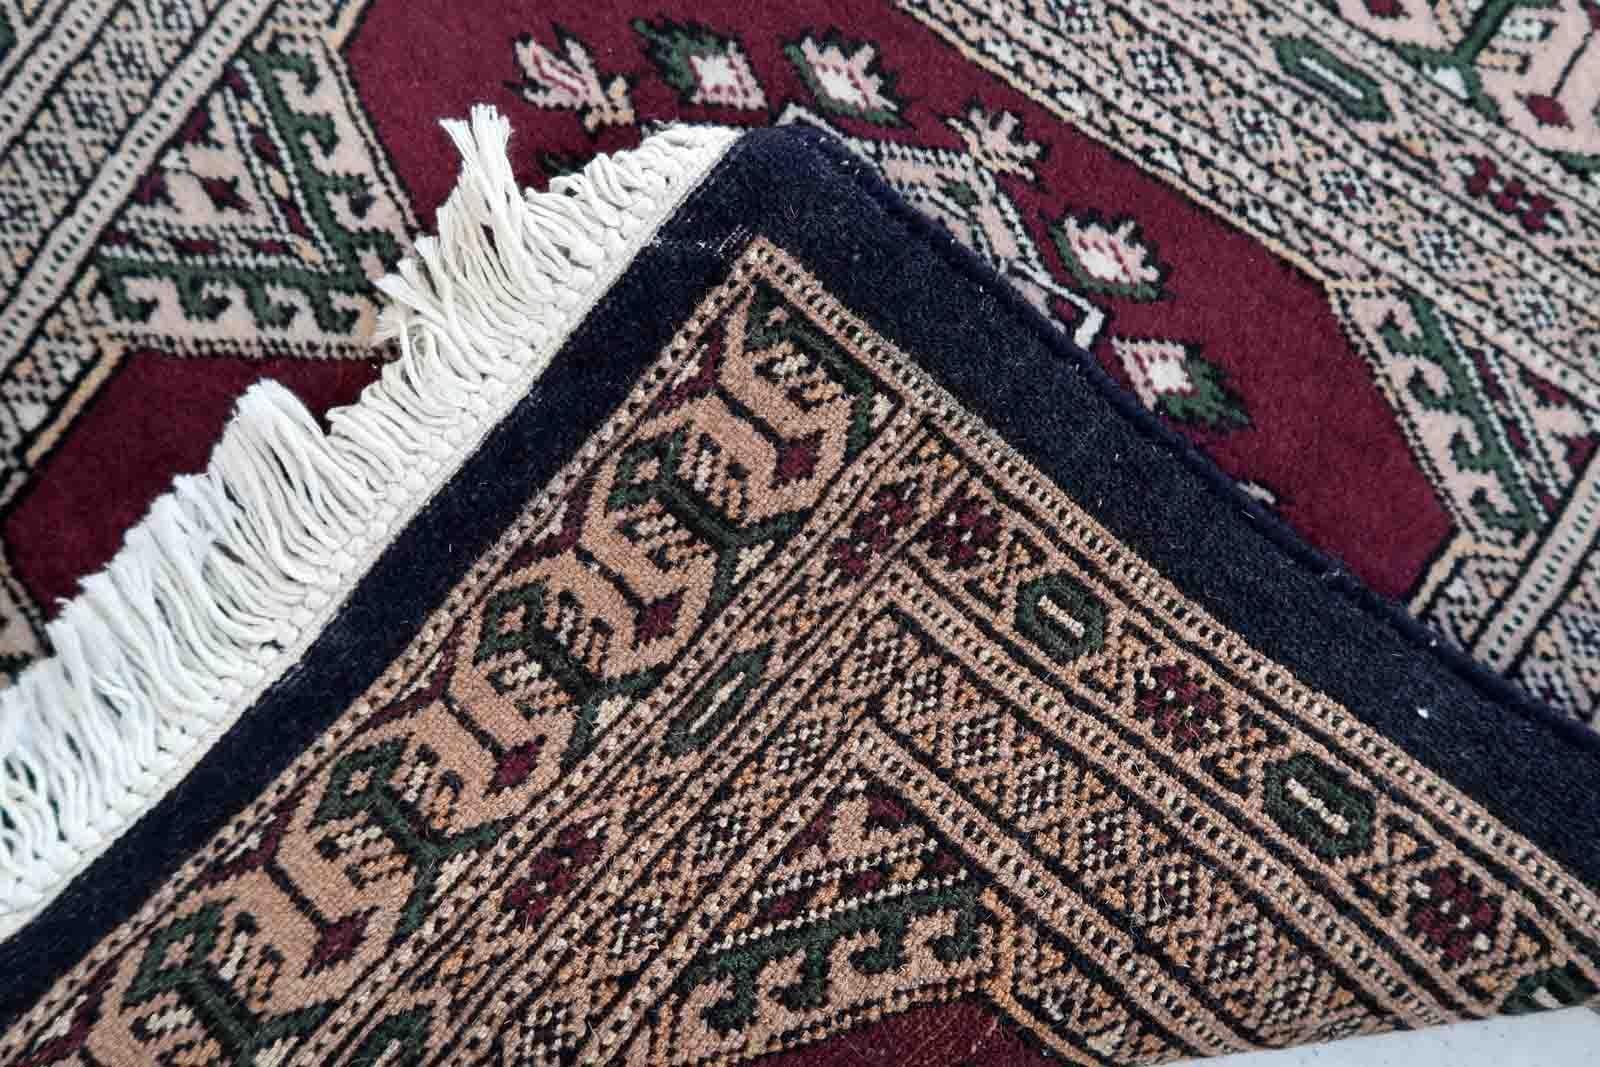 Handmade vintage Uzbek Bukhara mat in original good condition. The rug has been made in wool in the end of 20th century.

-condition: original good,

-circa: 1970s,

-size: 1.8' x 2.1' (55cm x 65cm),

-material: wool,

-country of origin: